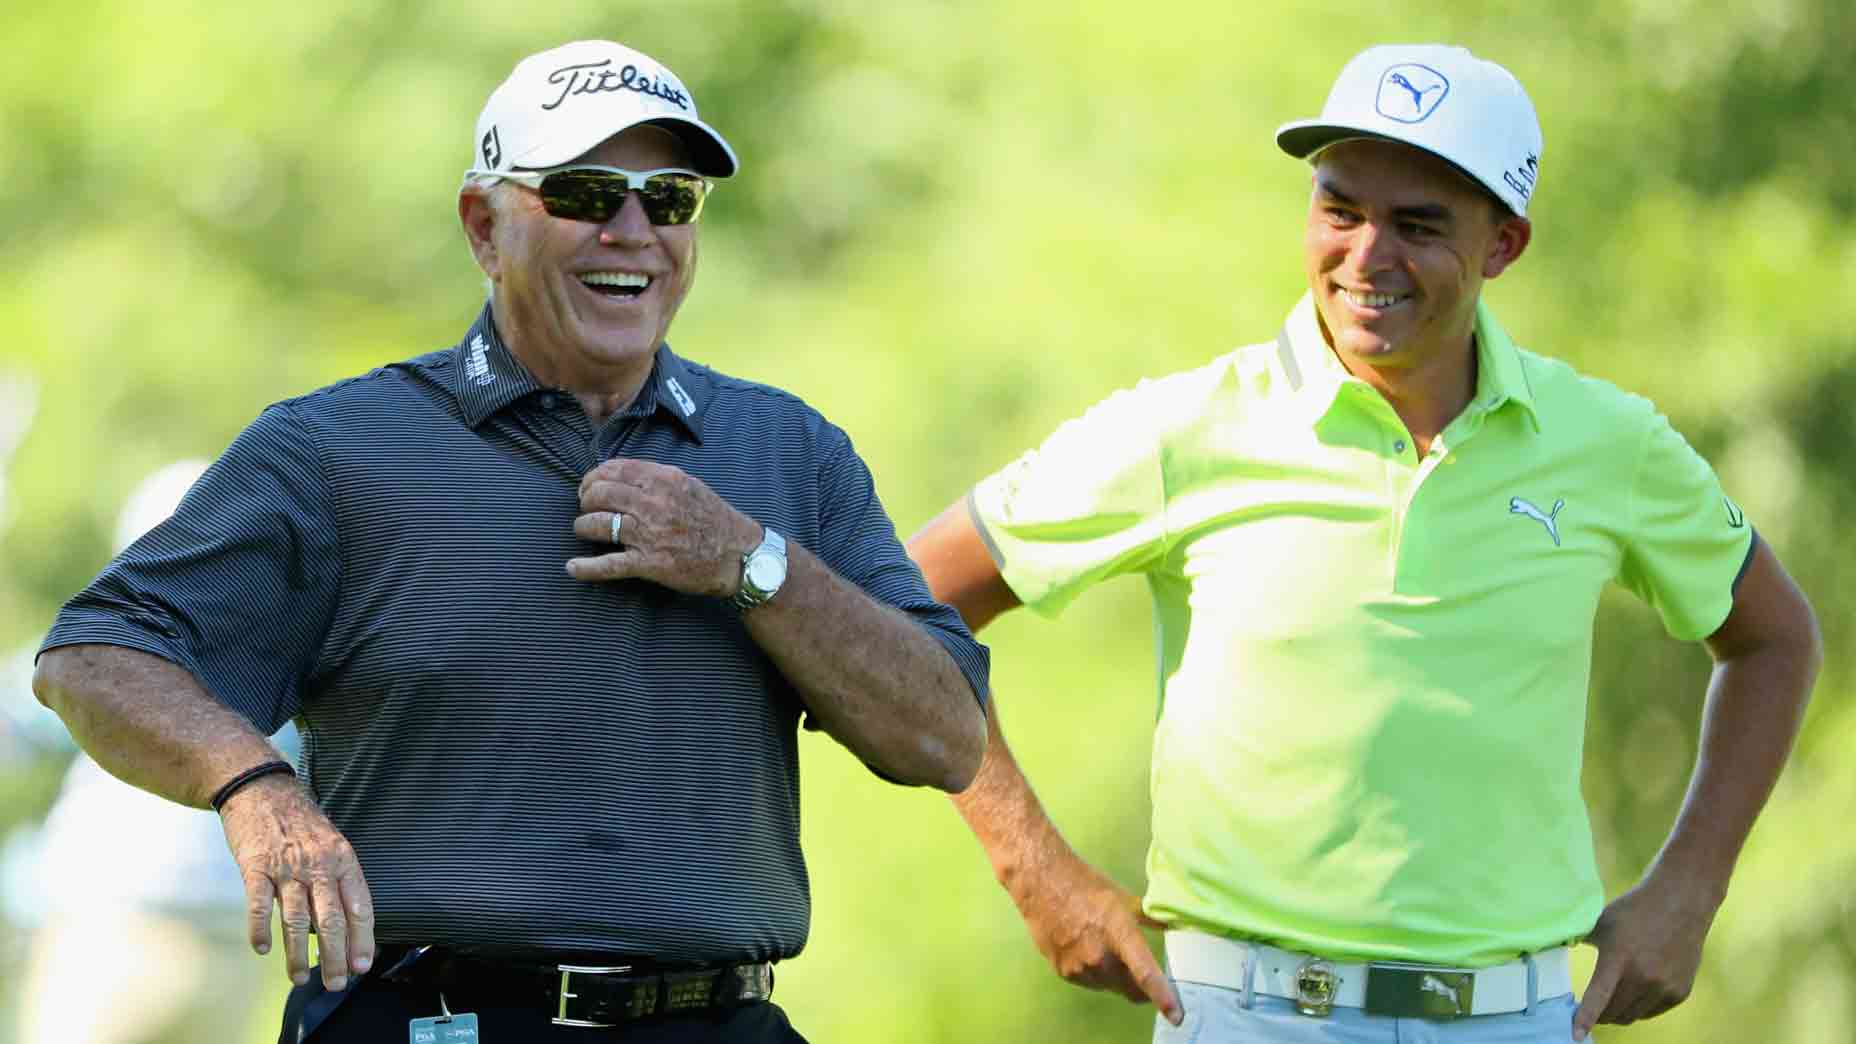 Why Butch Harmon says Rickie Fowler’s win means more to him than Tiger, Phil majors